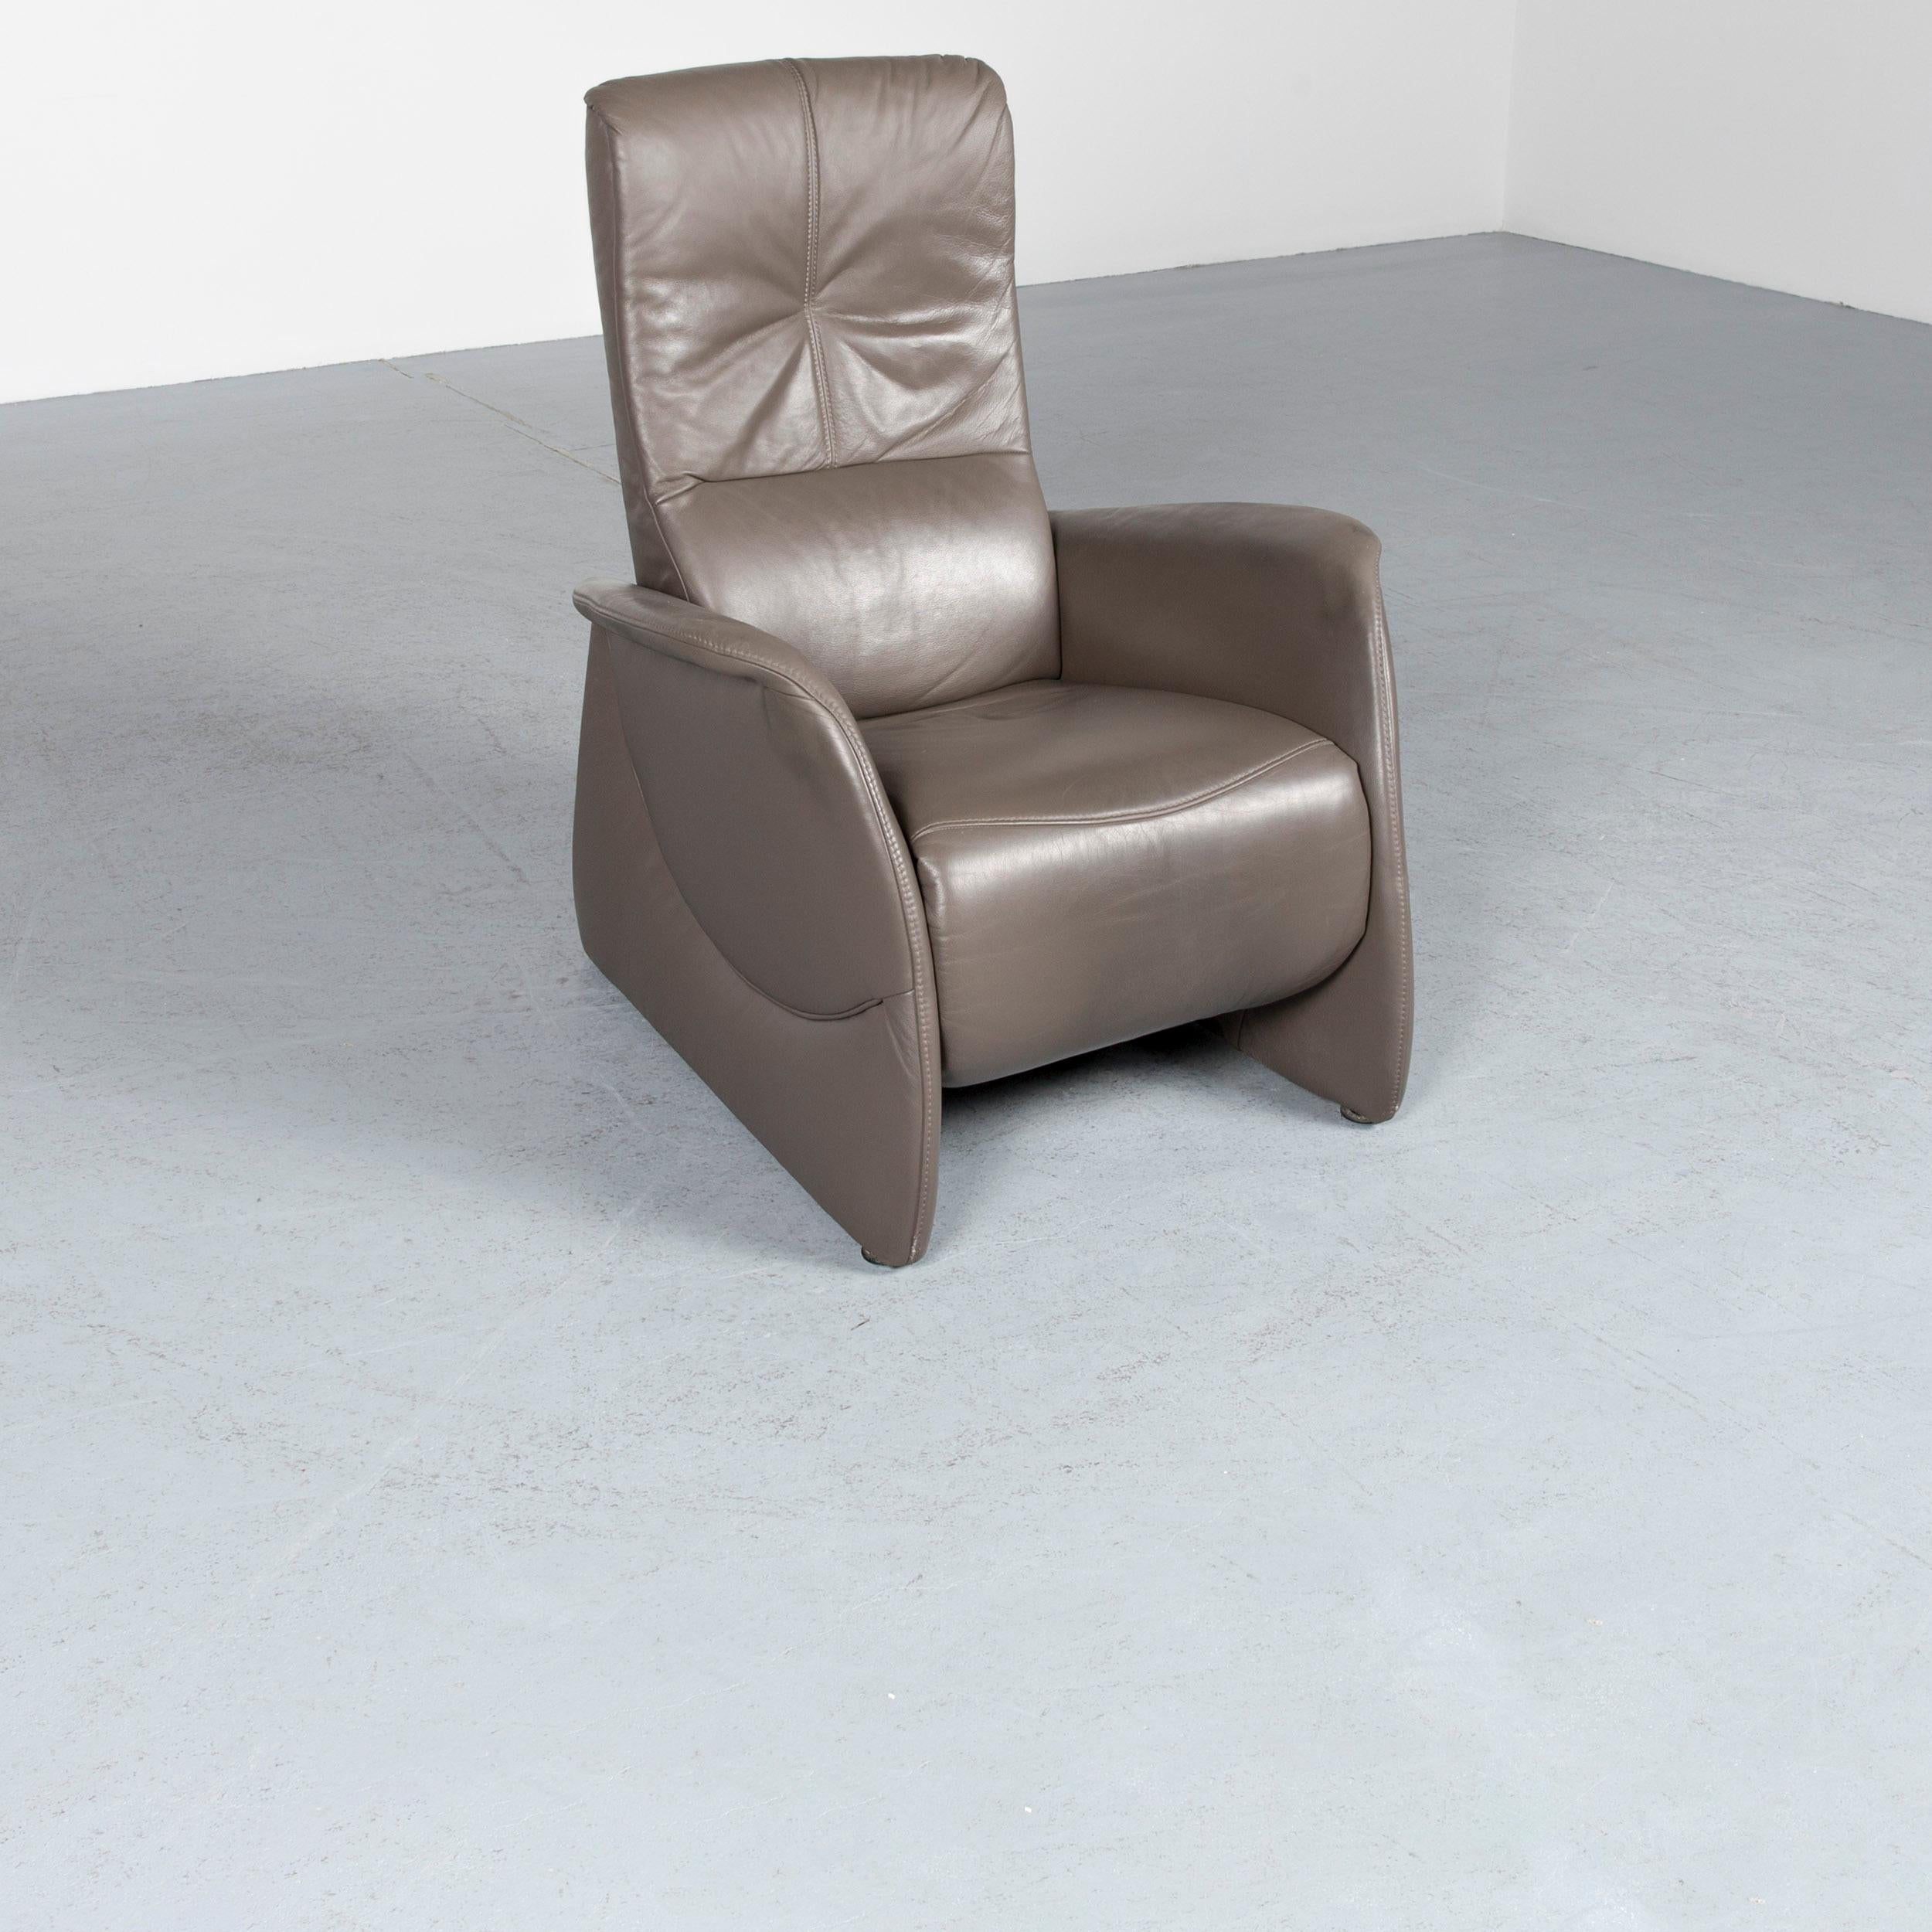 We bring to you a Himolla designer leather armchair grey relax function chair.

























